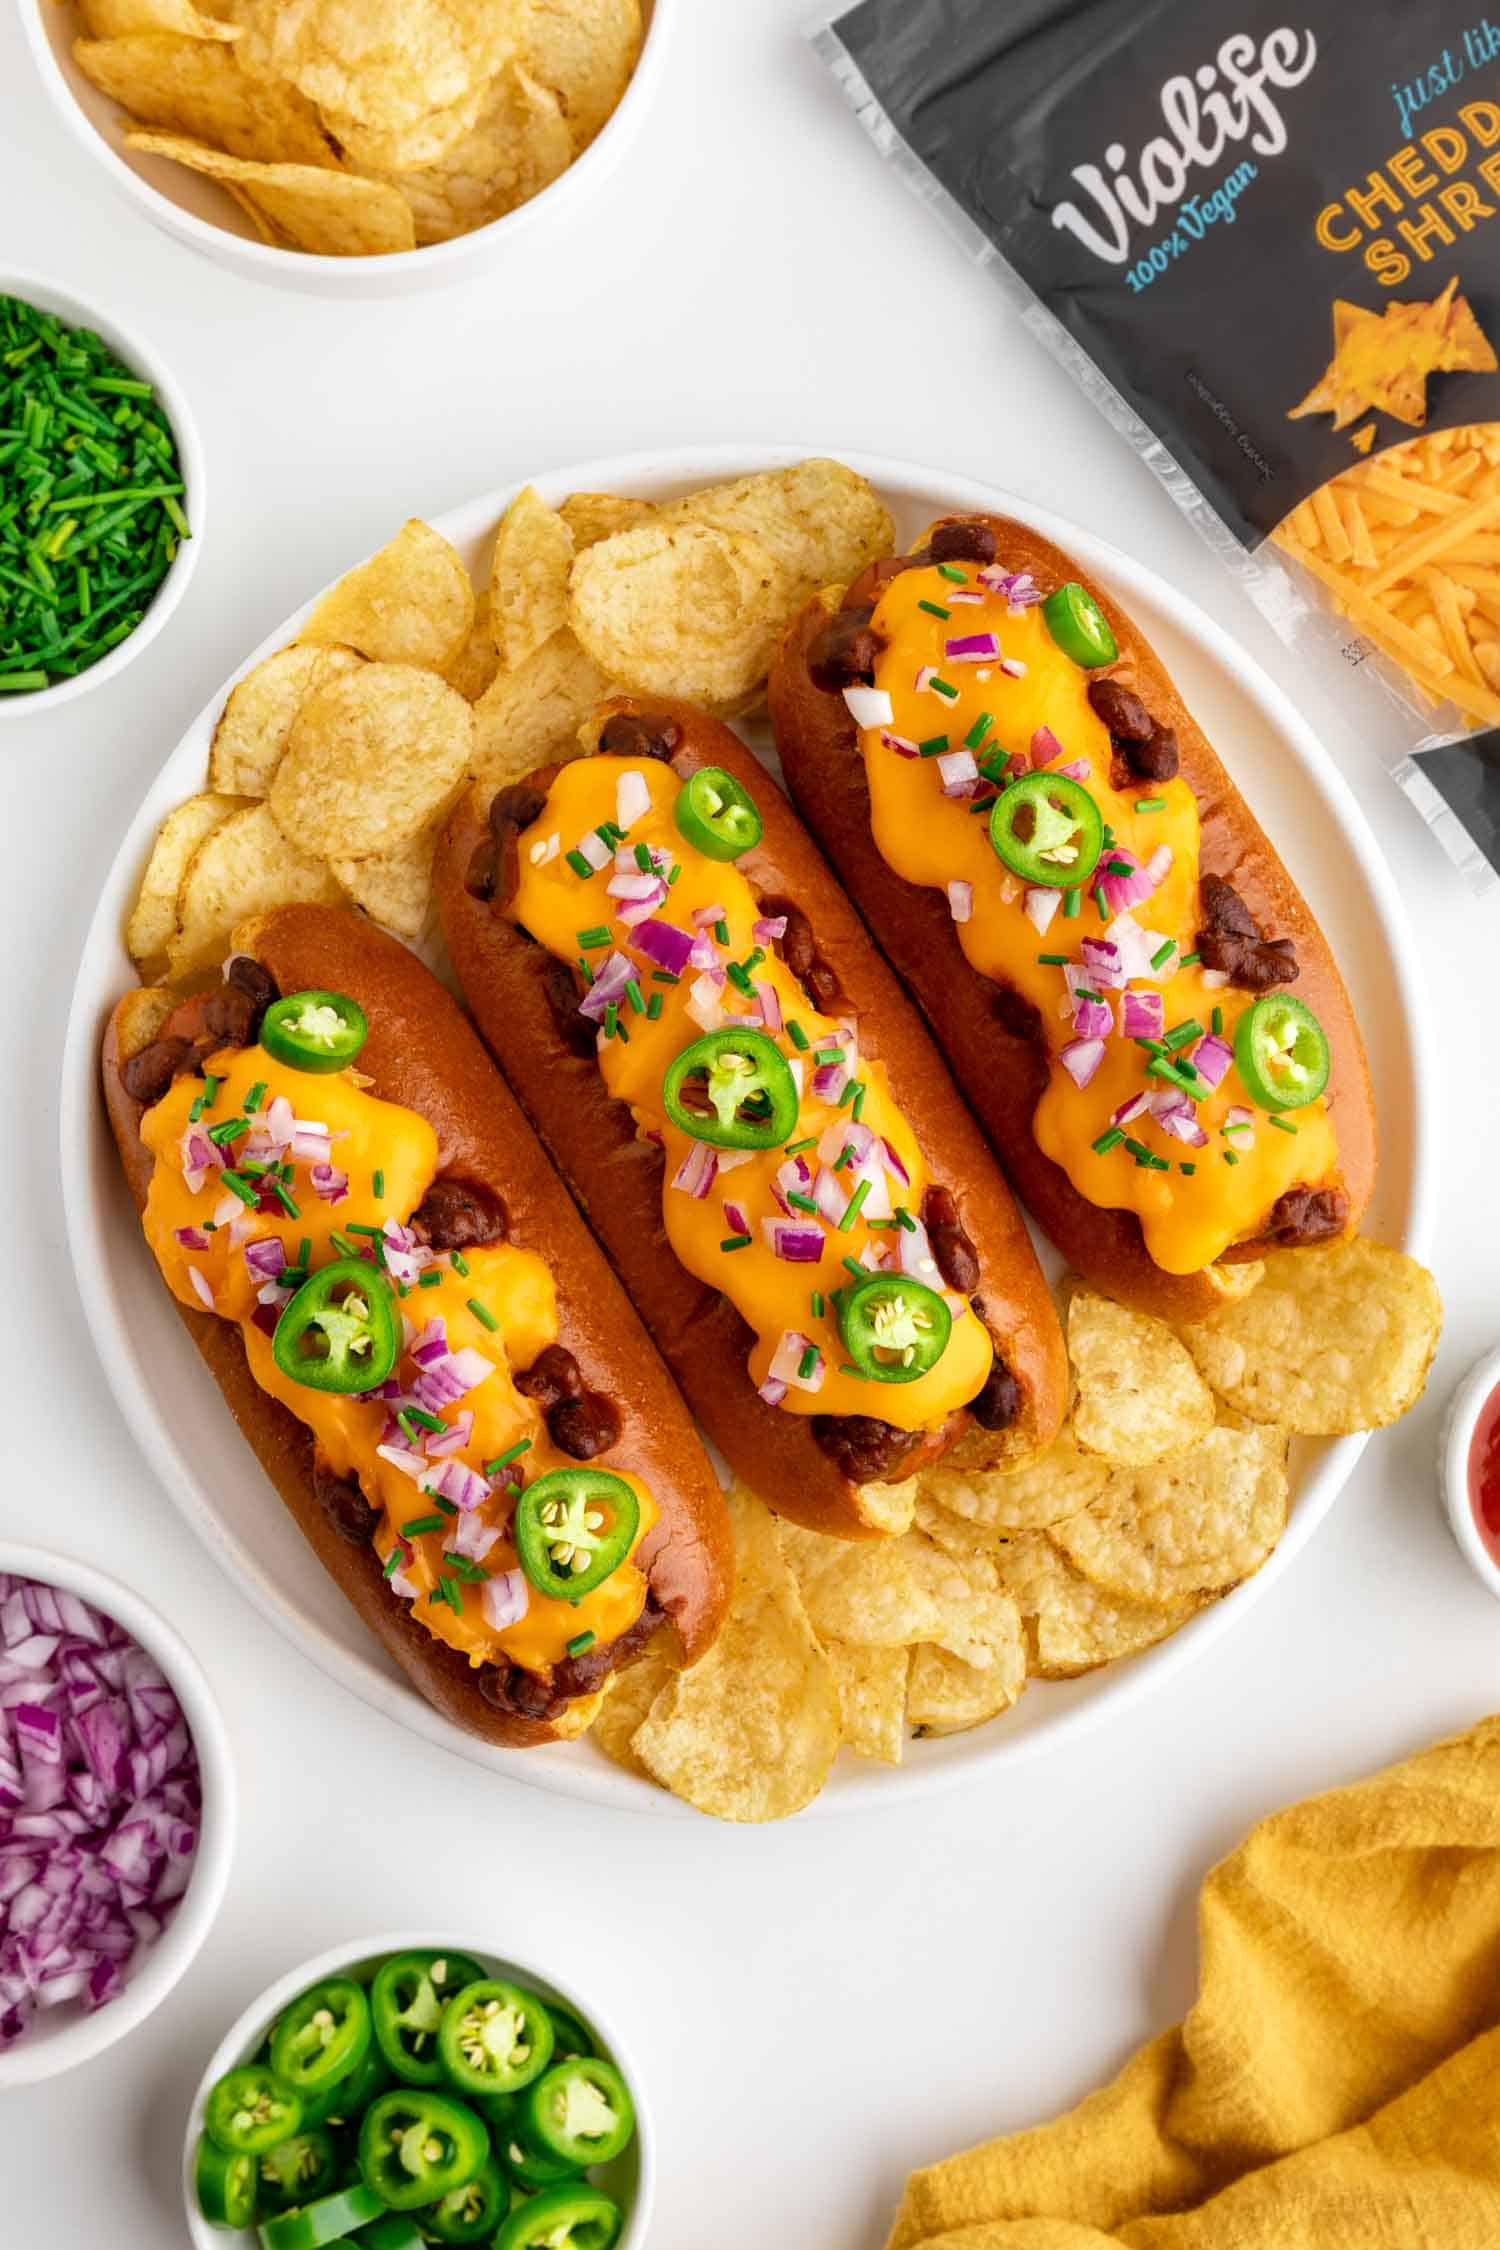 chili cheese dogs ingredient flatlay with violife dairy-free cheddar cheese shreds